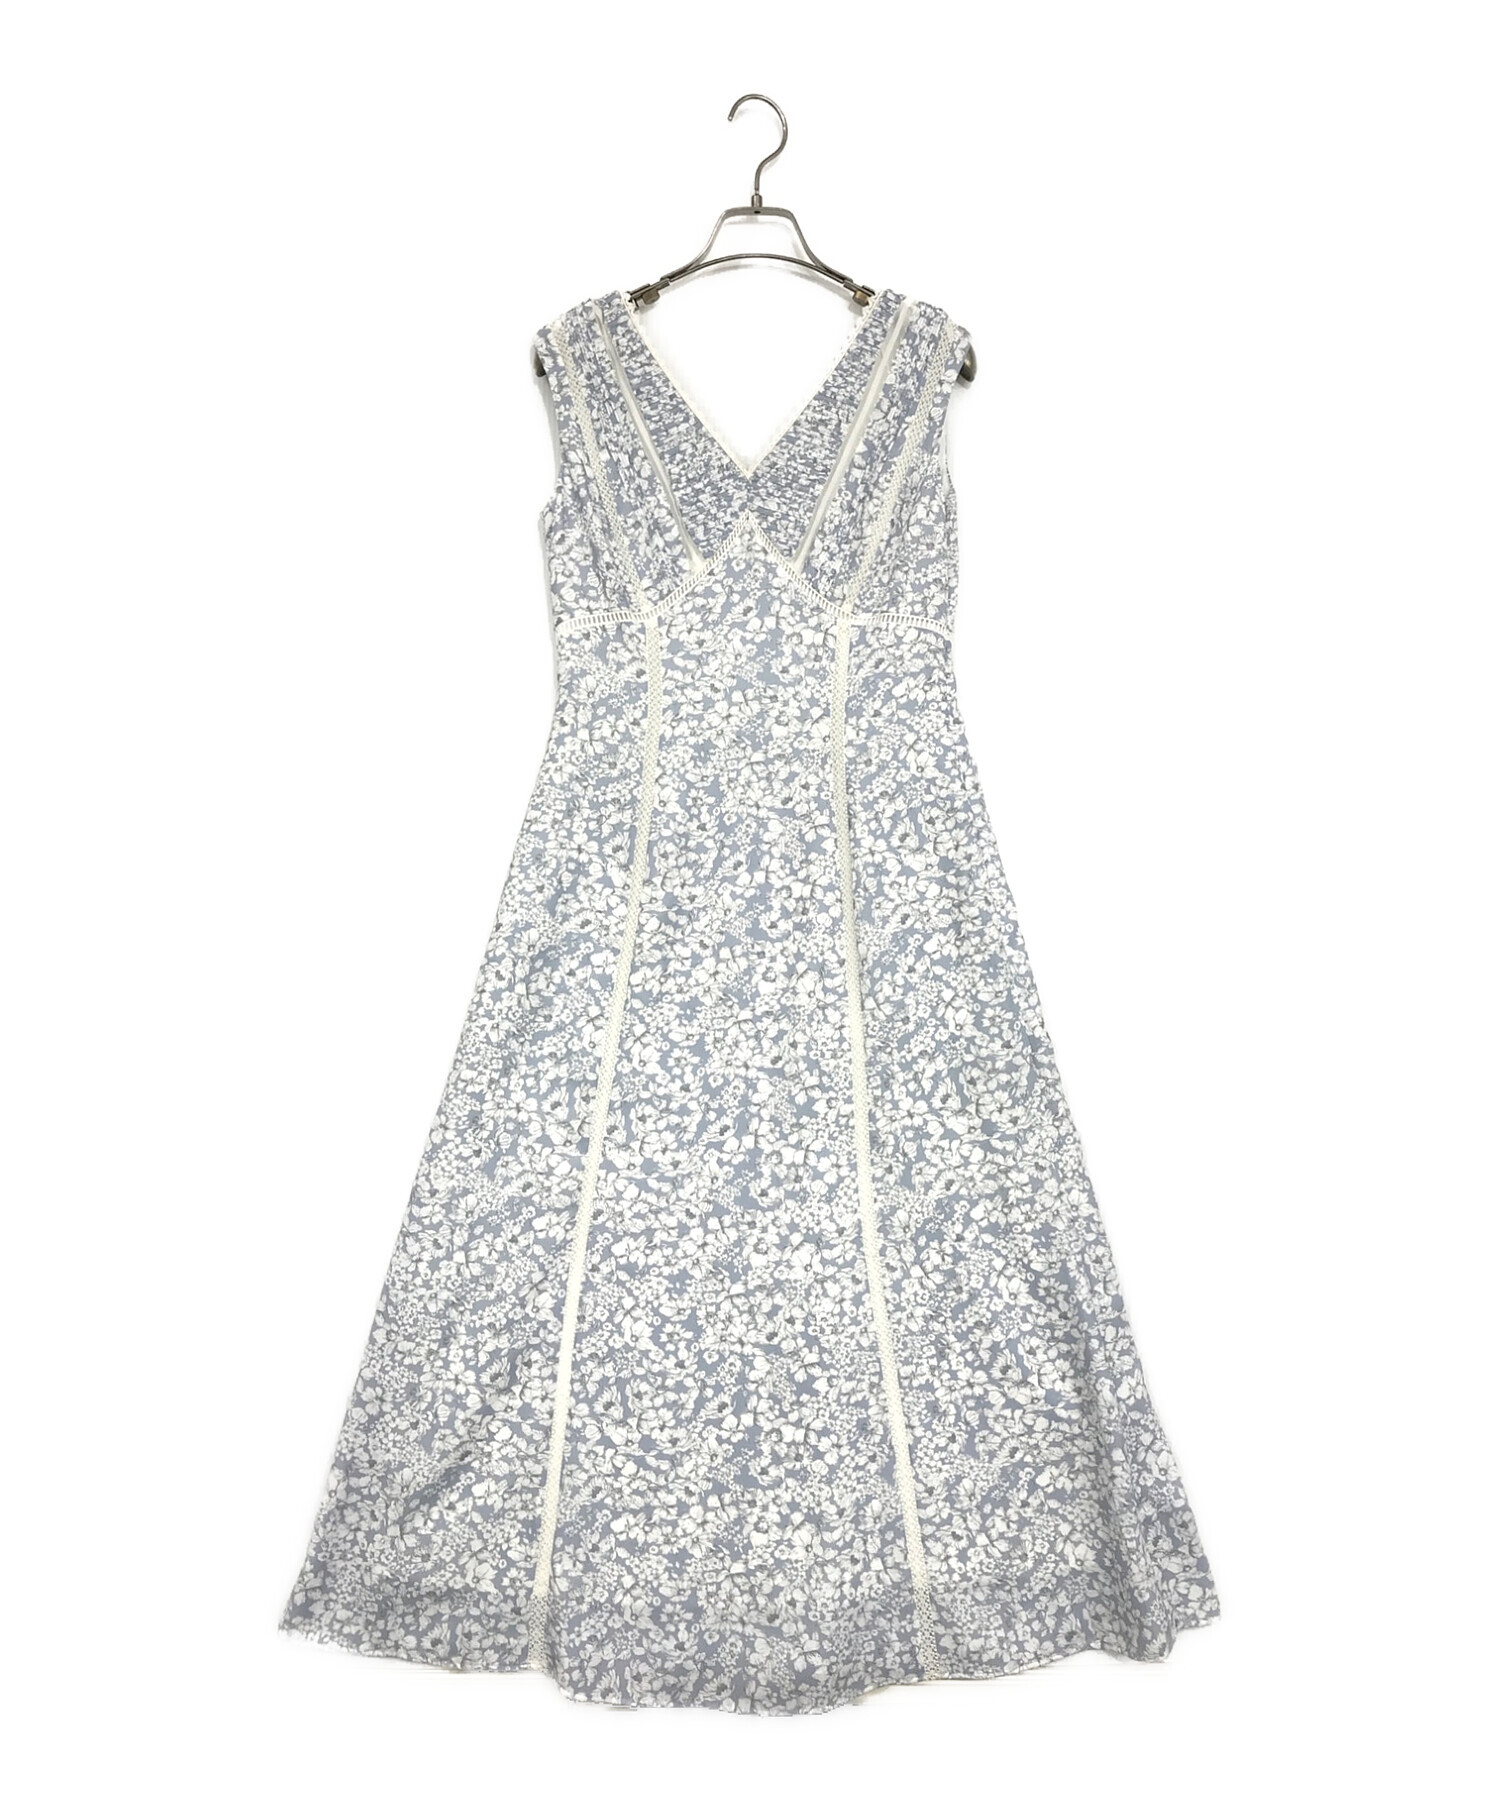 HER LIP TO (ハーリップトゥ) Lace Trimmed Floral Dress ブルー サイズ:SIZE　S